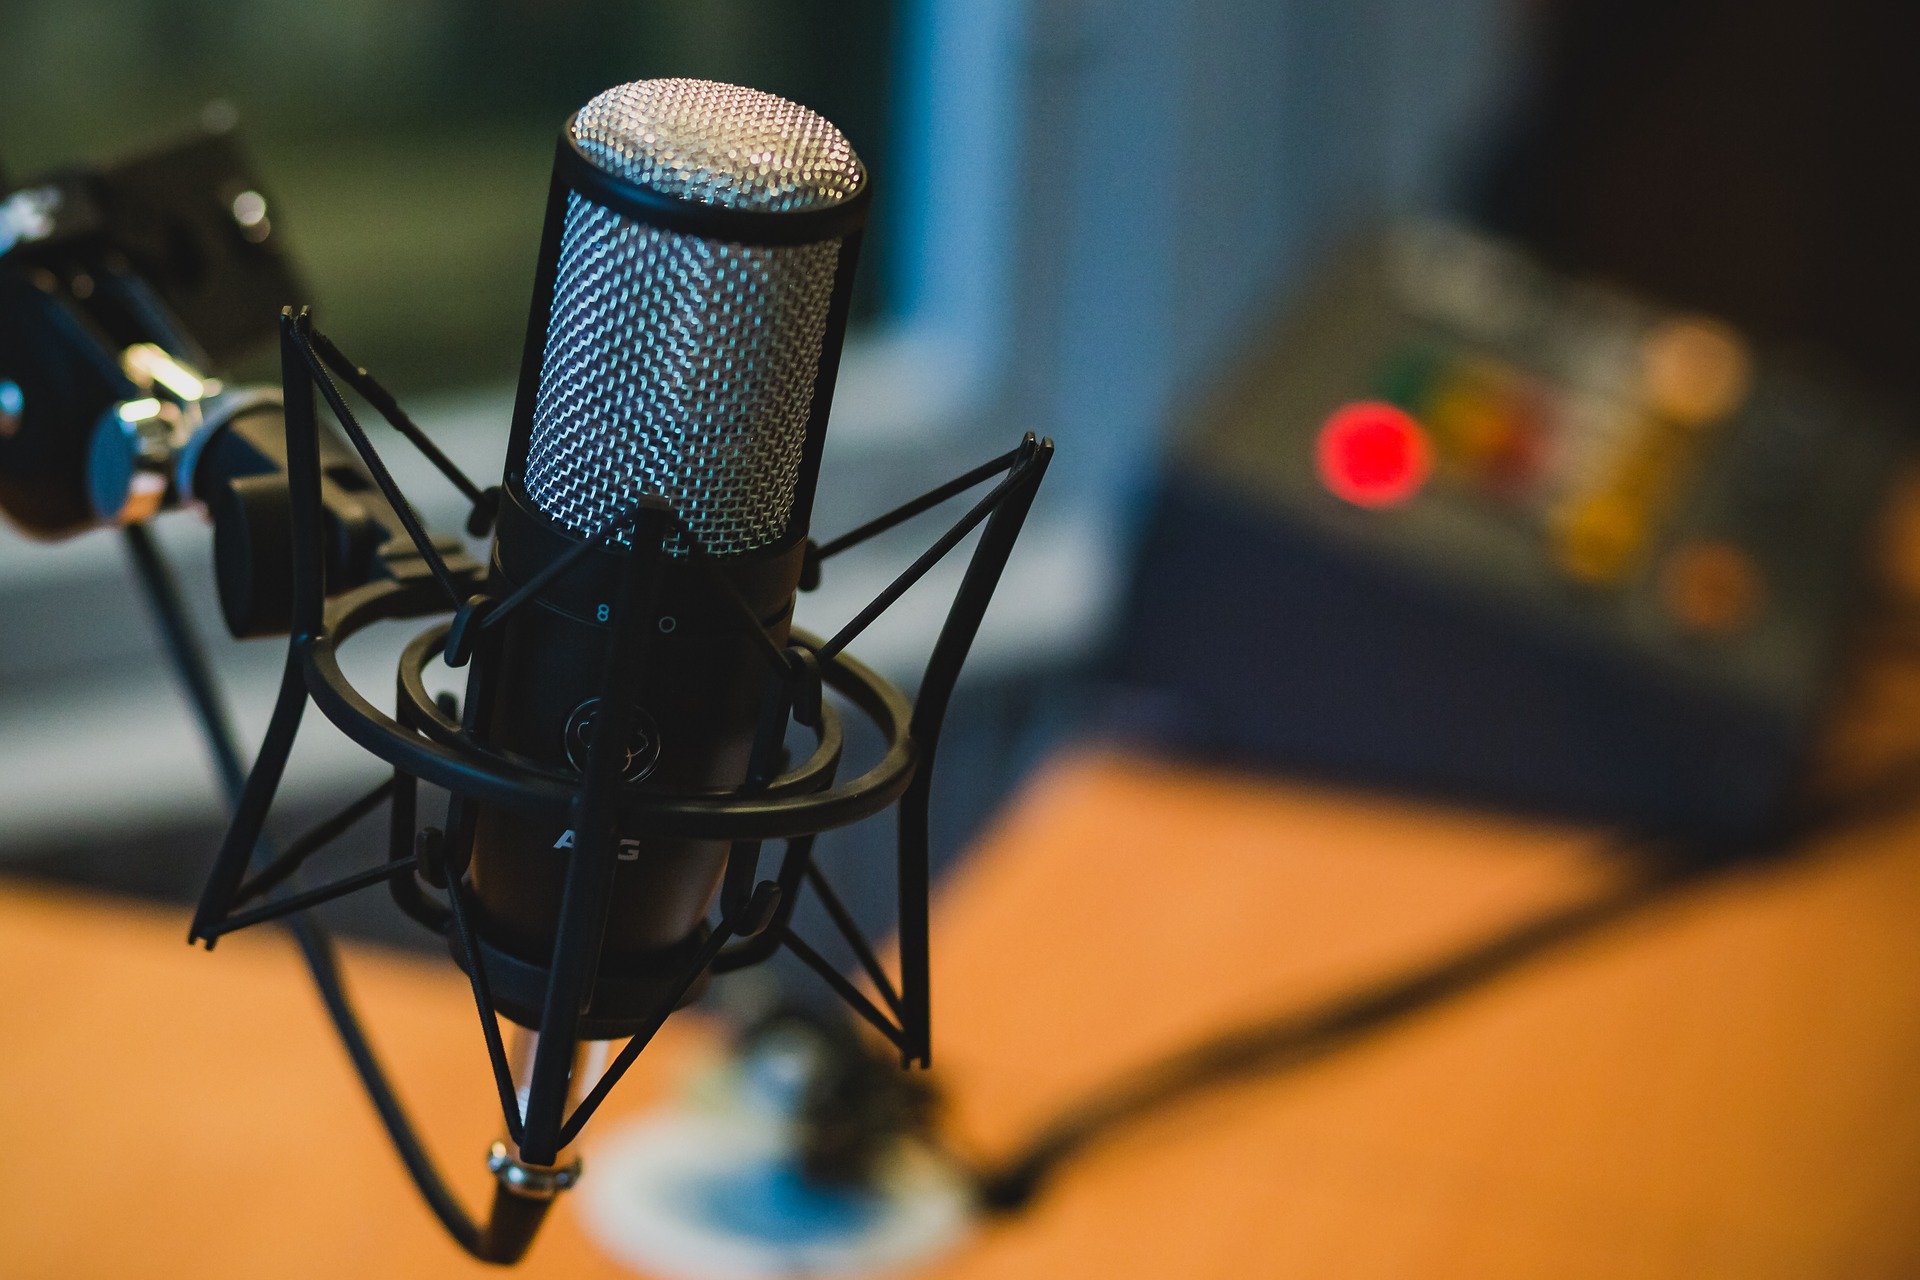 A detailed shot of a professional microphone with the studio gently blurred in the background.